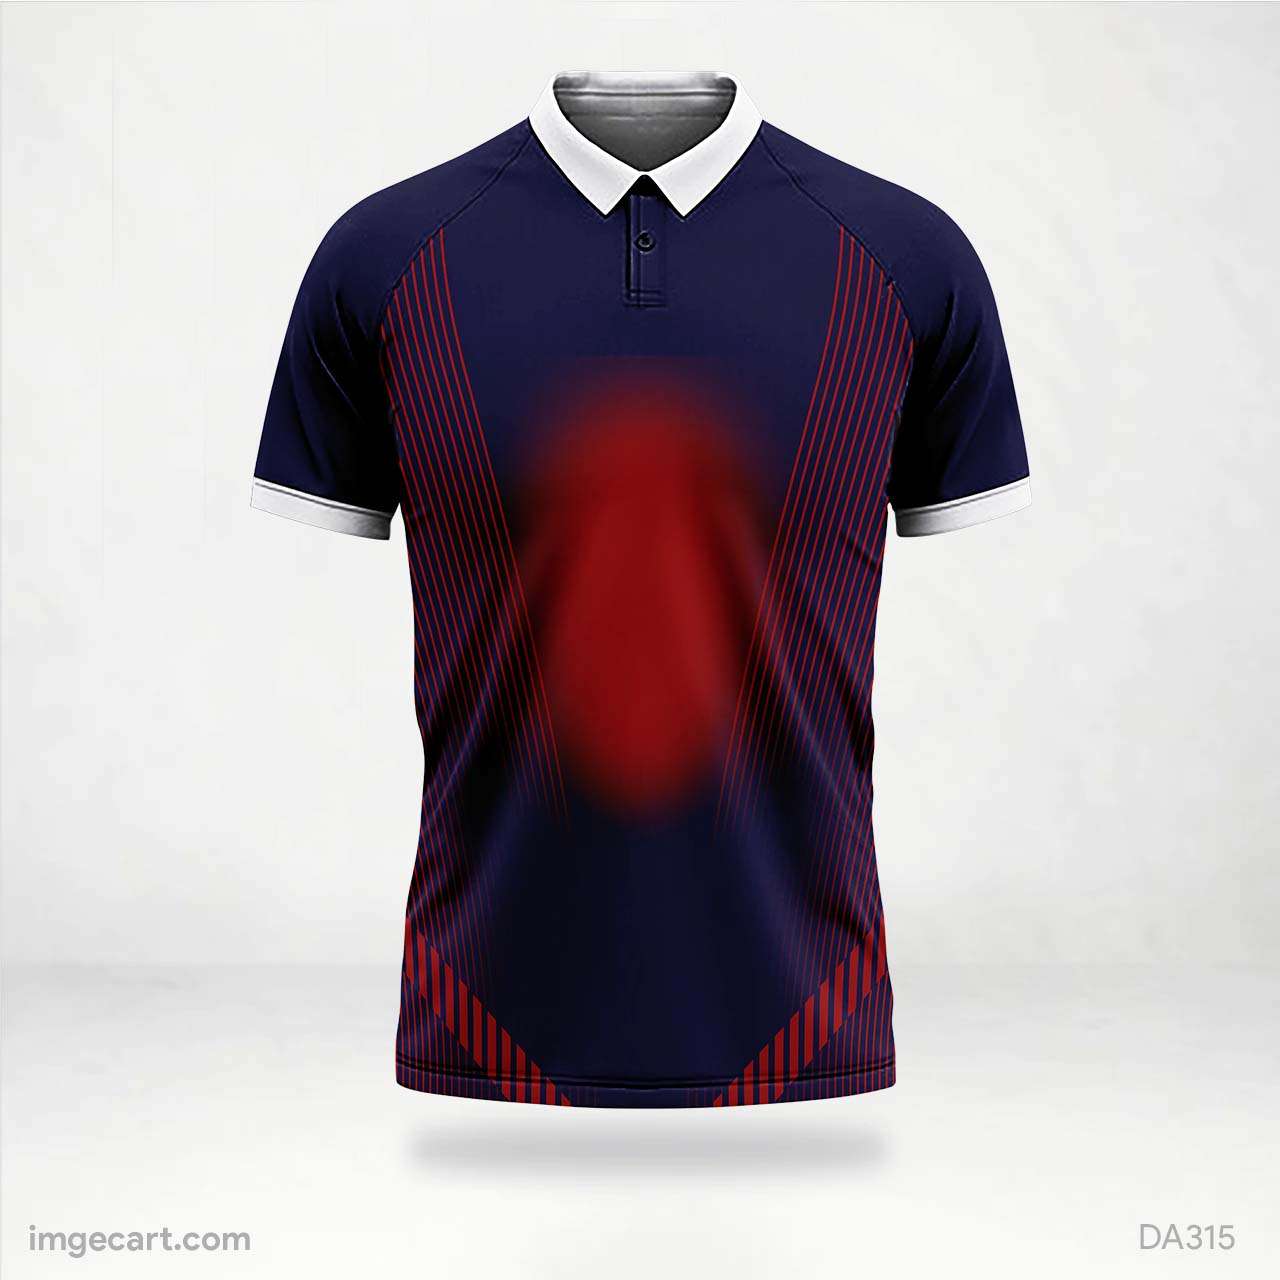 Cricket jersey blue with red pattern - imgecart